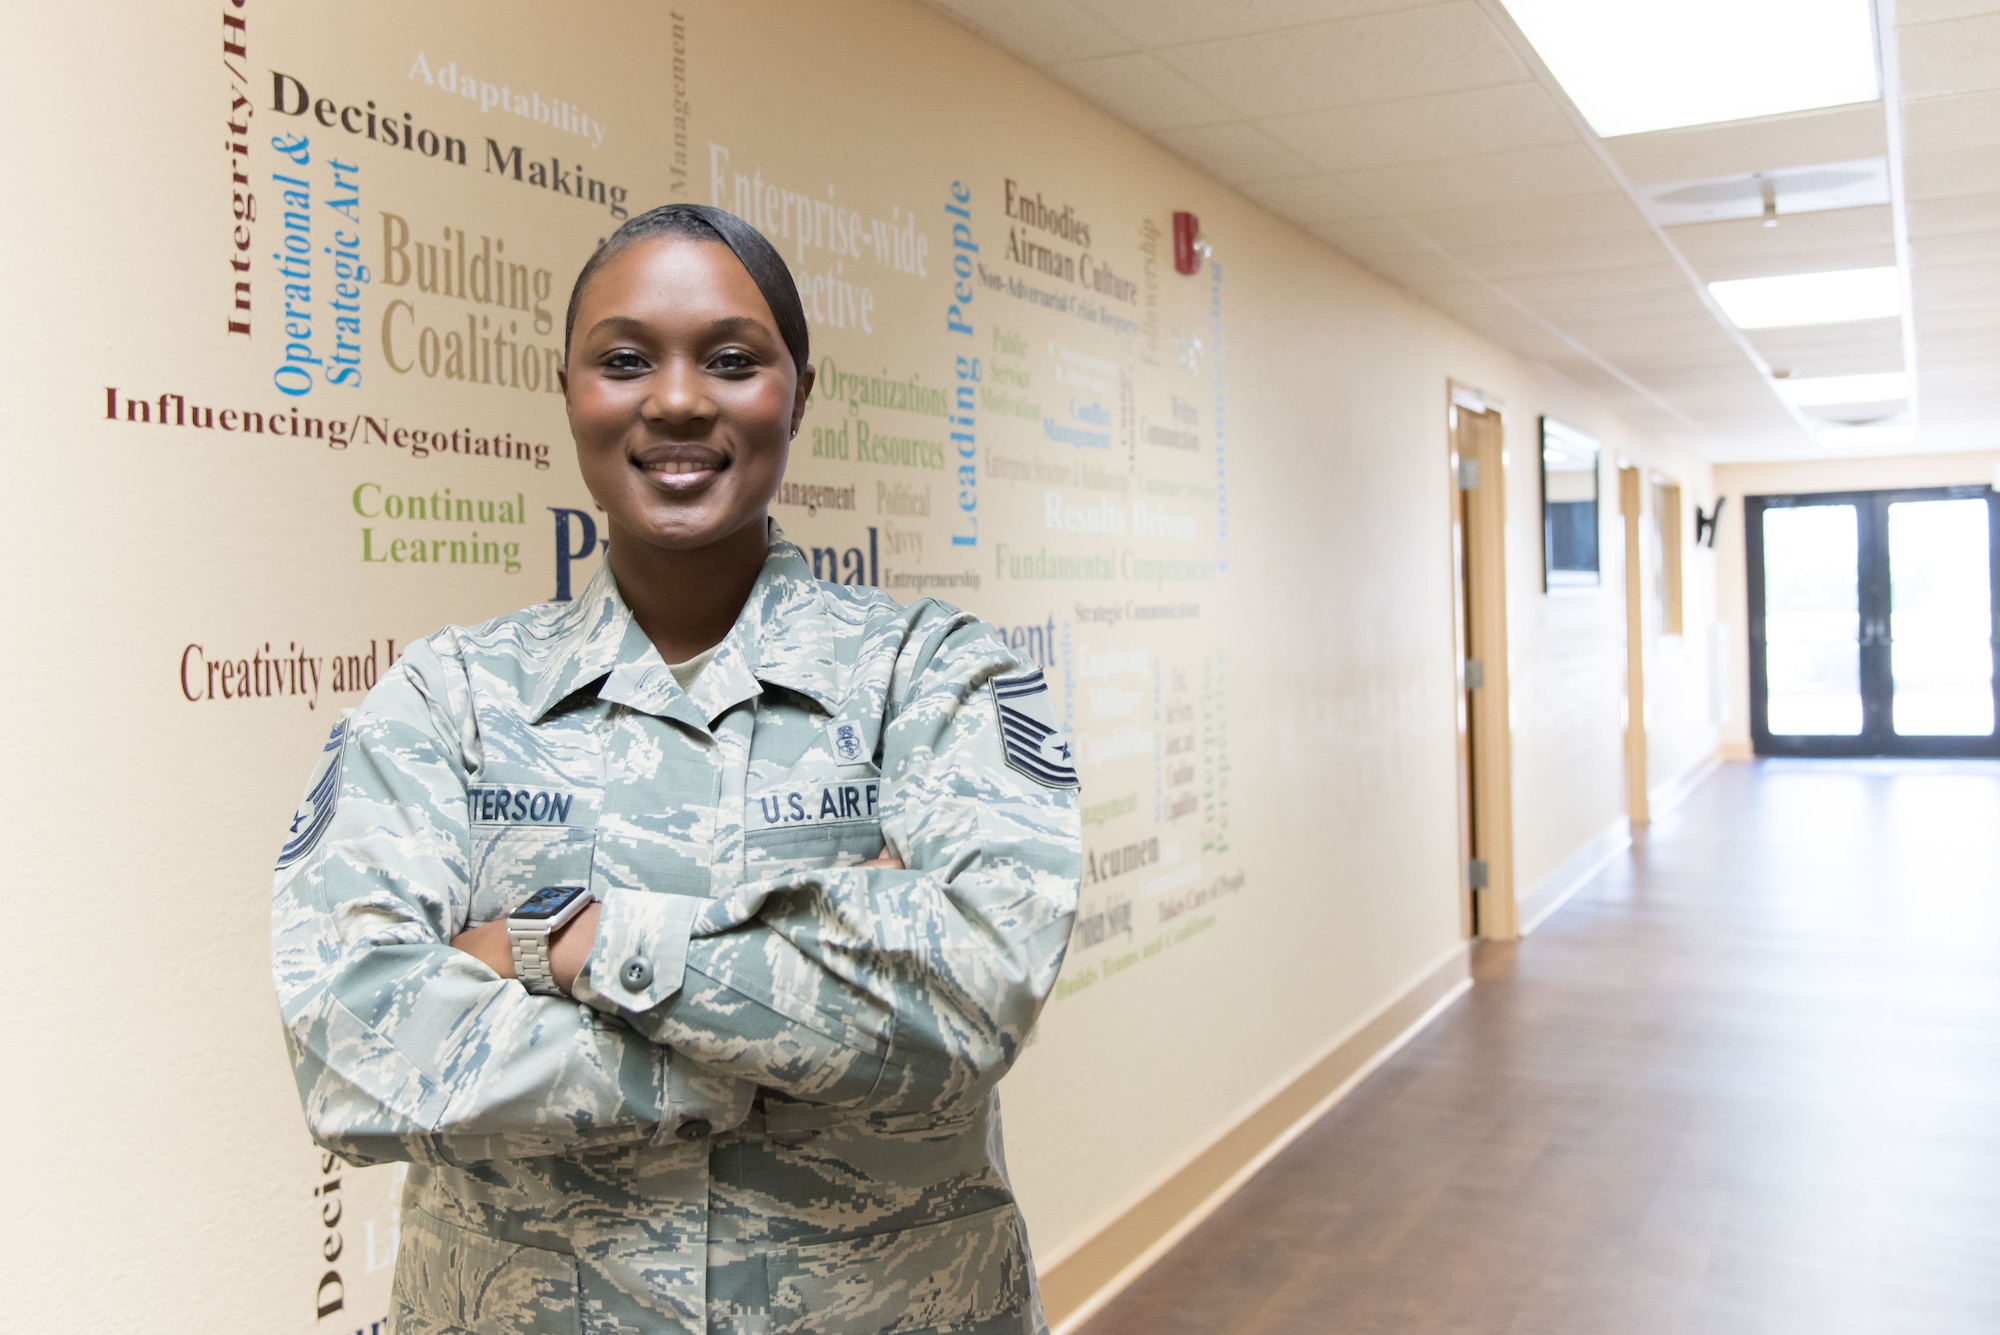 Senior Master Sgt. Tiffanny Patterson, Keesler career assistance advisor, poses for a photo at Keesler Air Force Base, Mississippi's recently rennovated Professional Development Center. Patterson is charged with facilitating professional development opportunities for reserve, active duty and civilian members of the base. (U.S. Air Force photo by Staff Sgt. Heather Heiney)